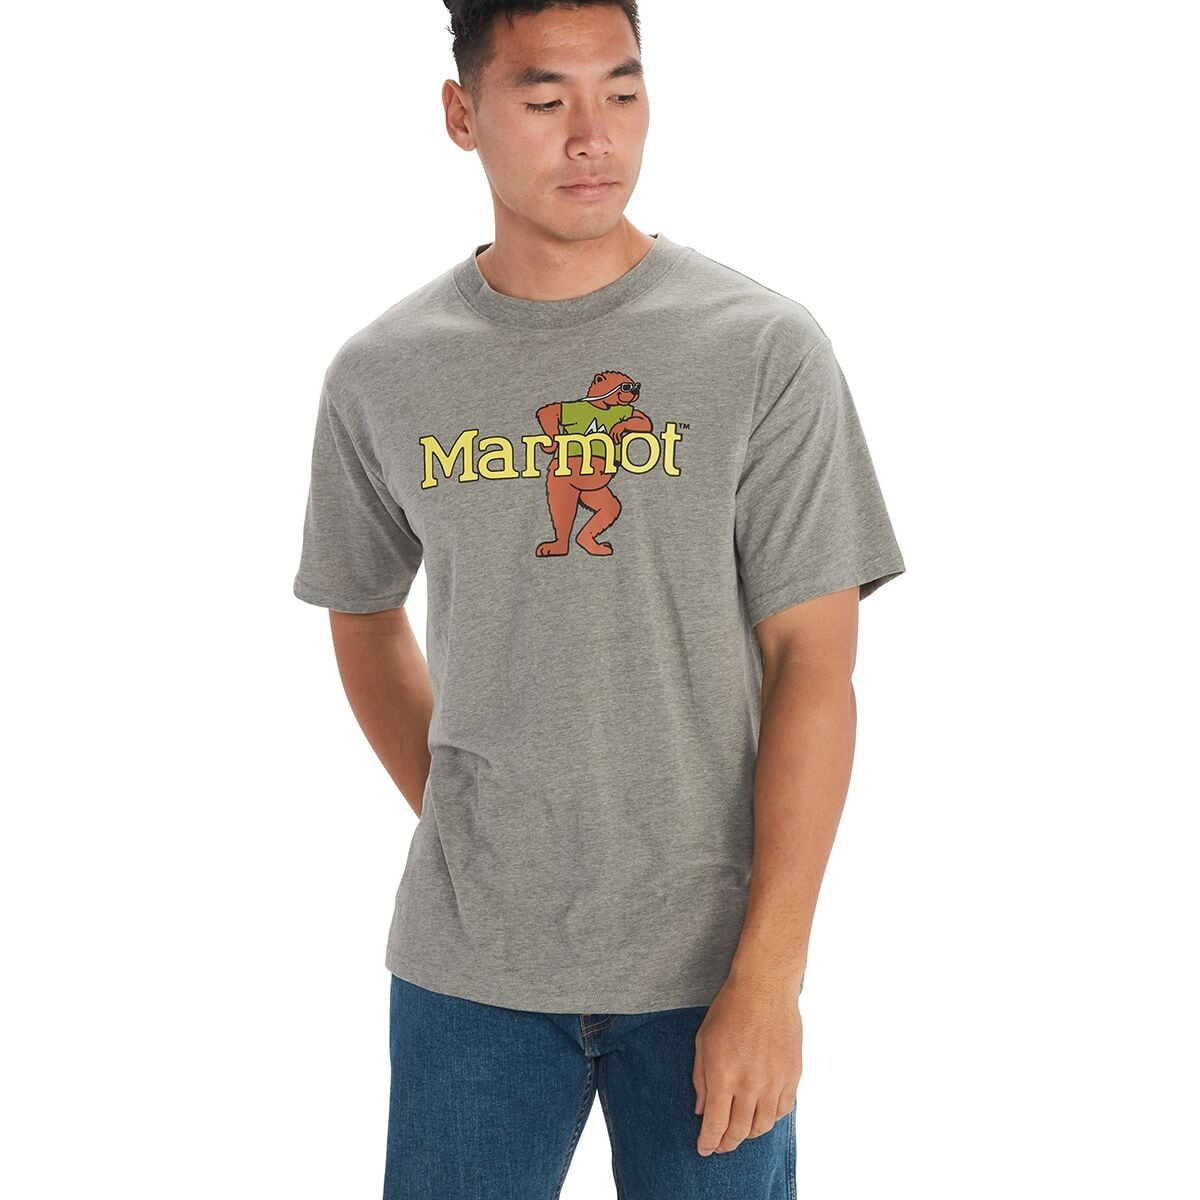 Leaning Marty T-Shirt - Men